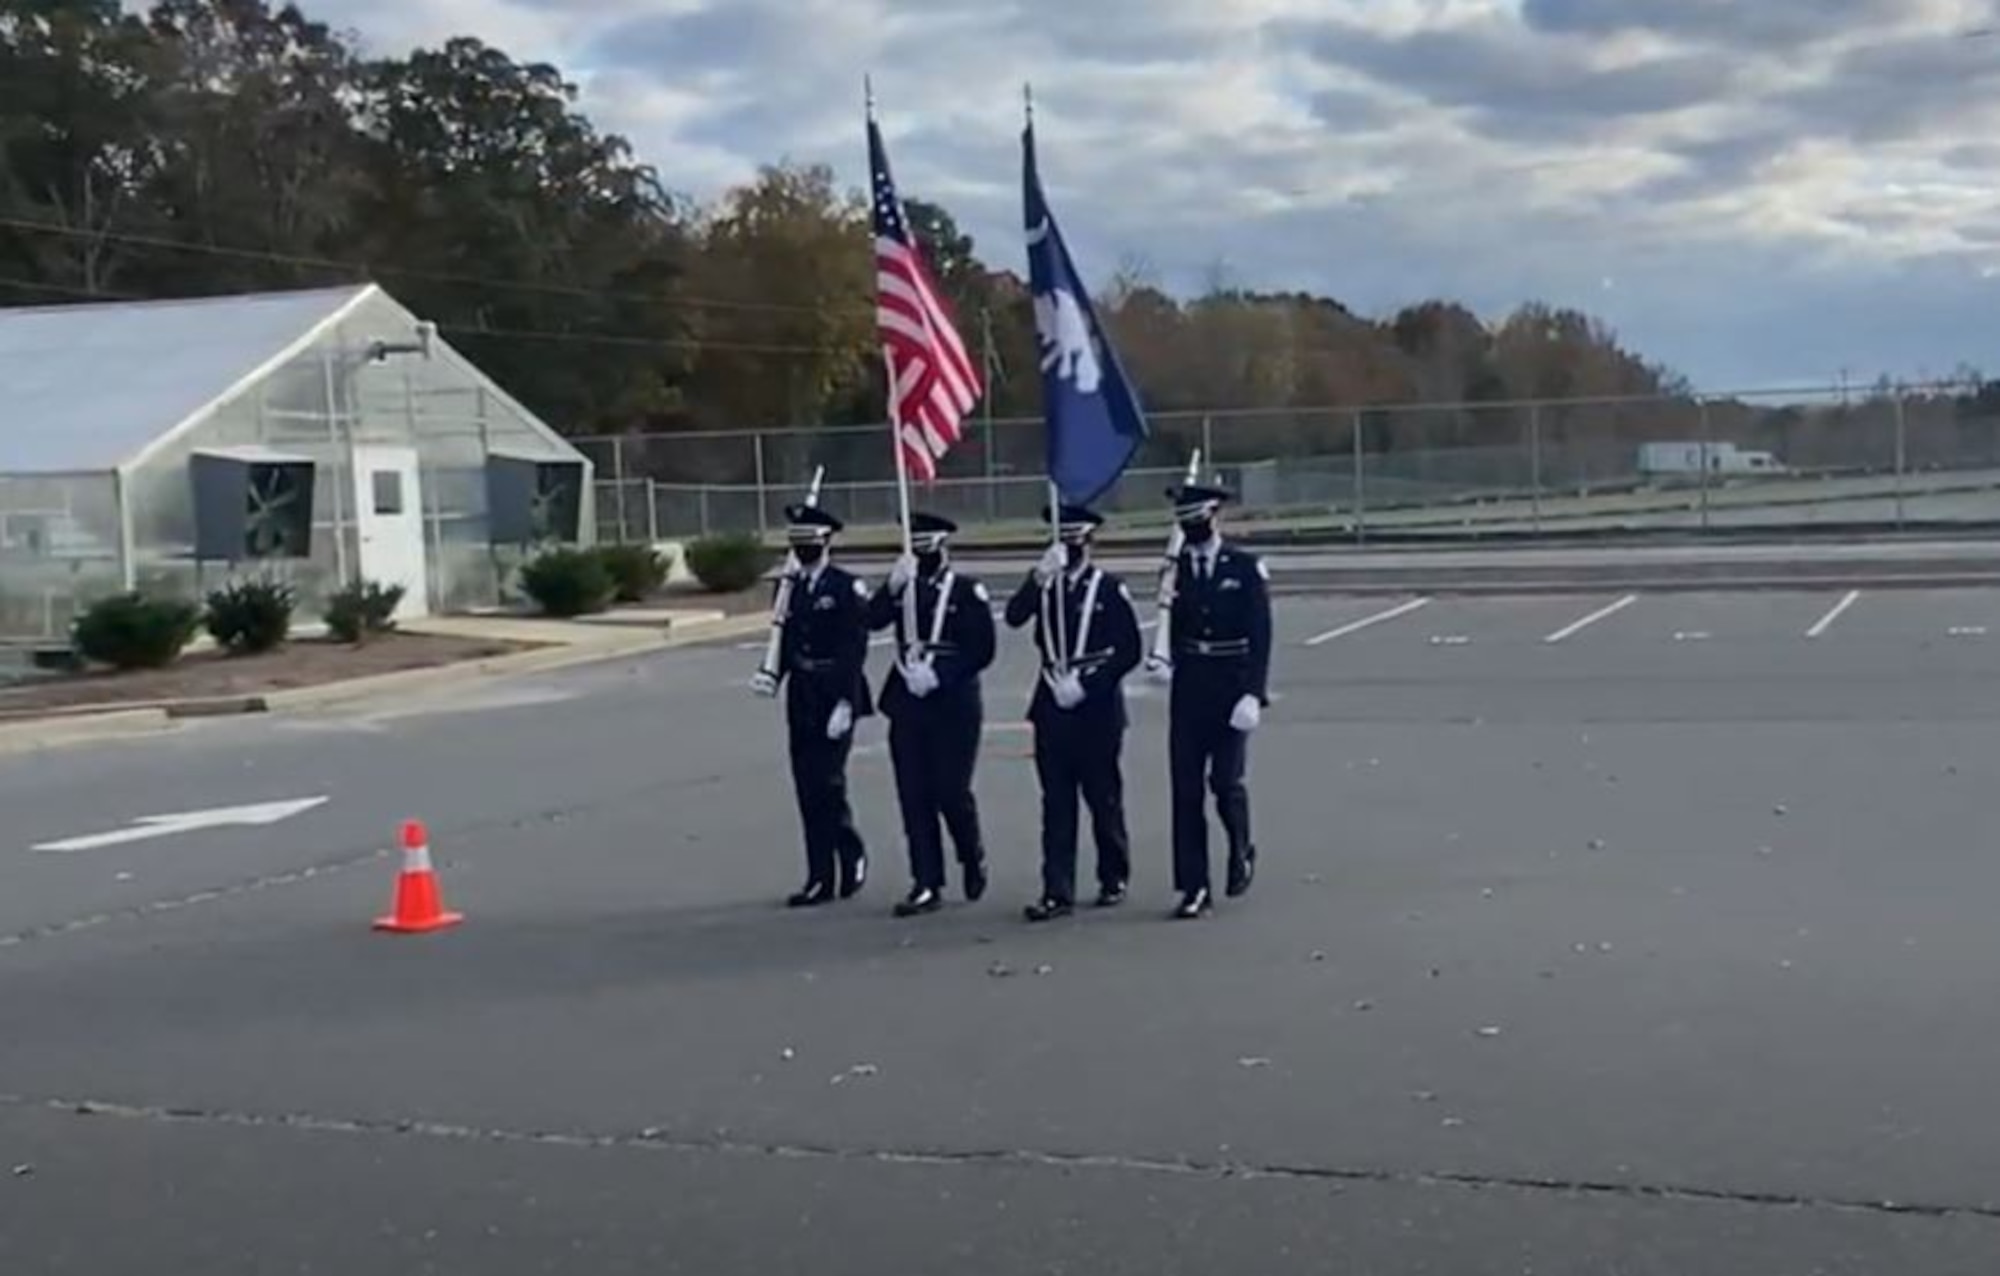 The Clover High School Air Force Junior Reserve Officer Training Guard color guard team perform drill movements during their competition video recording in Clovis, South Carolina. Teams from across 7 states competed in several events, including Color Guard, Individual Armed, Individual Unarmed, Element Armed, Element Unarmed, Element Unarmed 1st year, Flight Armed and Flight Unarmed.